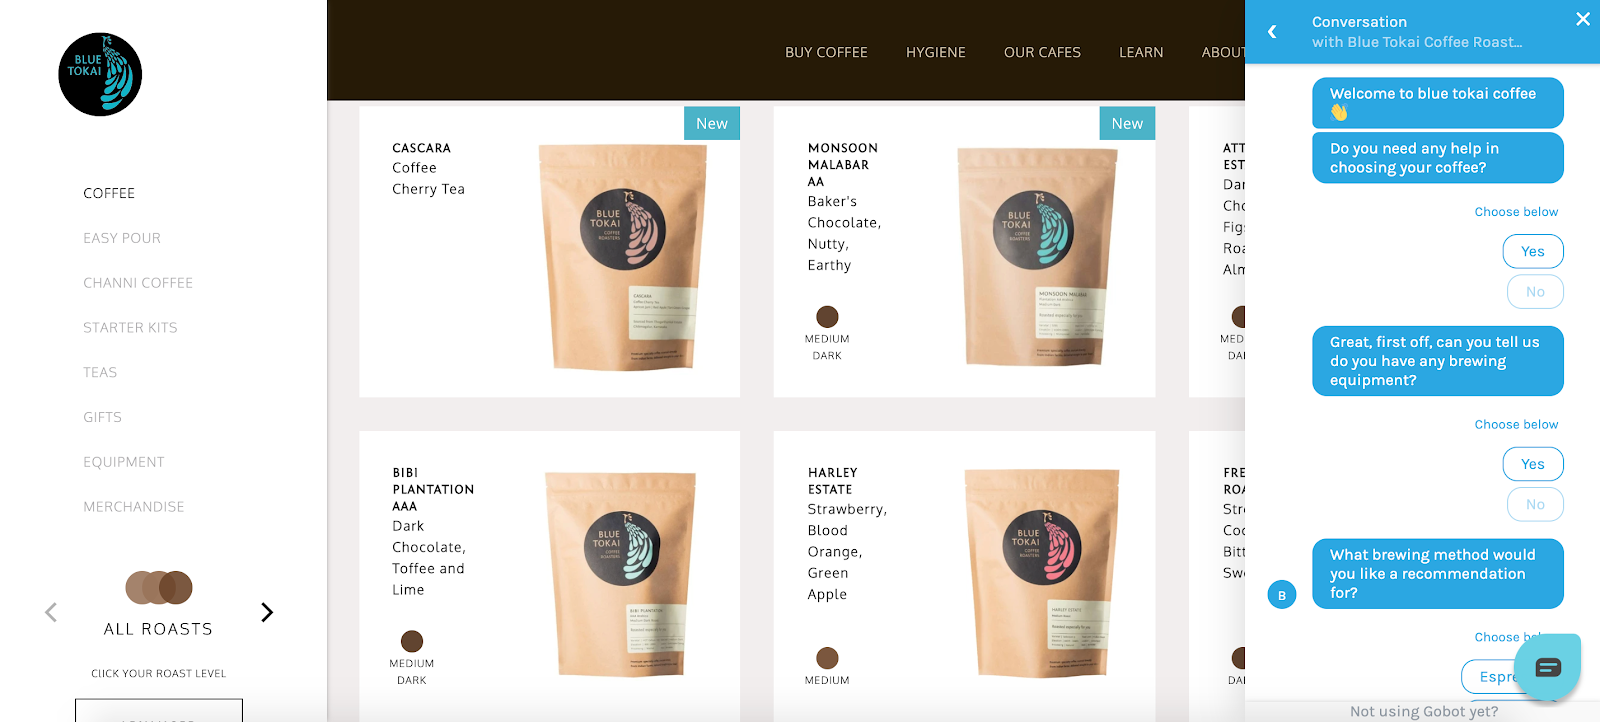 sell coffee online 4 chatbots